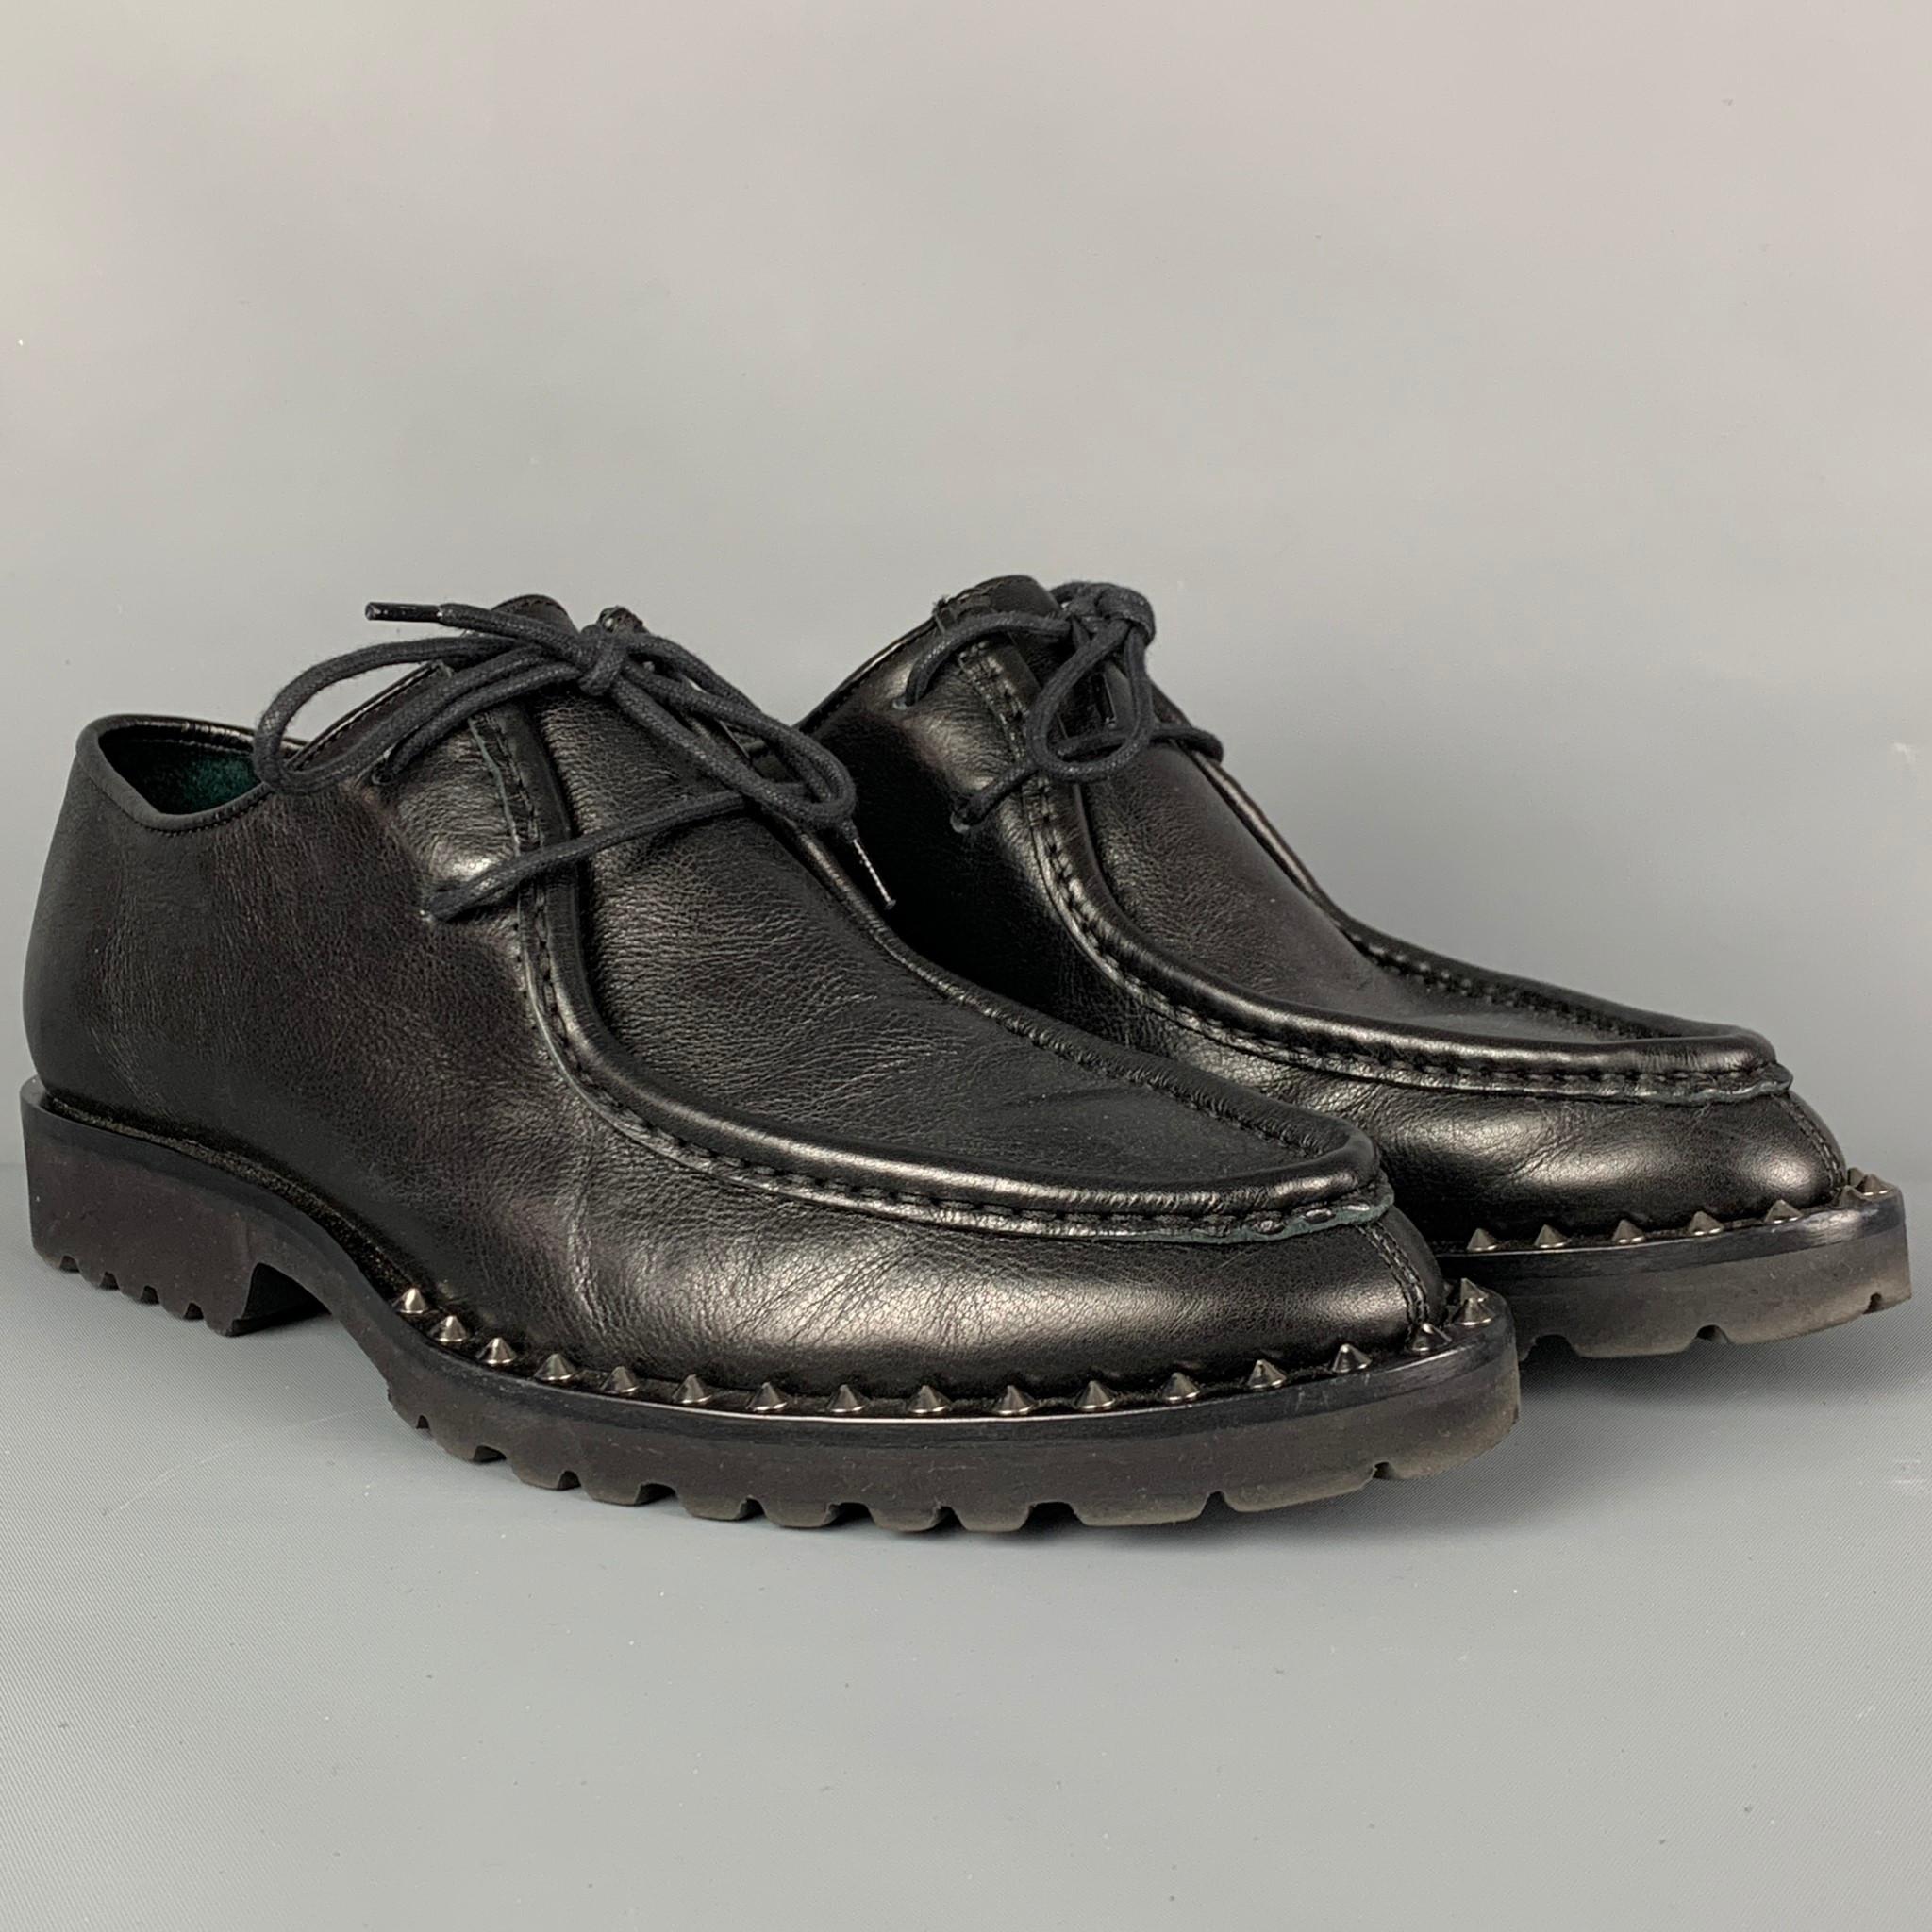 DSQUARED2 'Worlds End' shoes comes in a black leather featuring studded details, narrow toe, and a lace up closure. Includes box. Made in Italy. 

Excellent Pre-Owned Condition.
Marked: 39

Outsole: 11.75 in. x 4.25 in. 